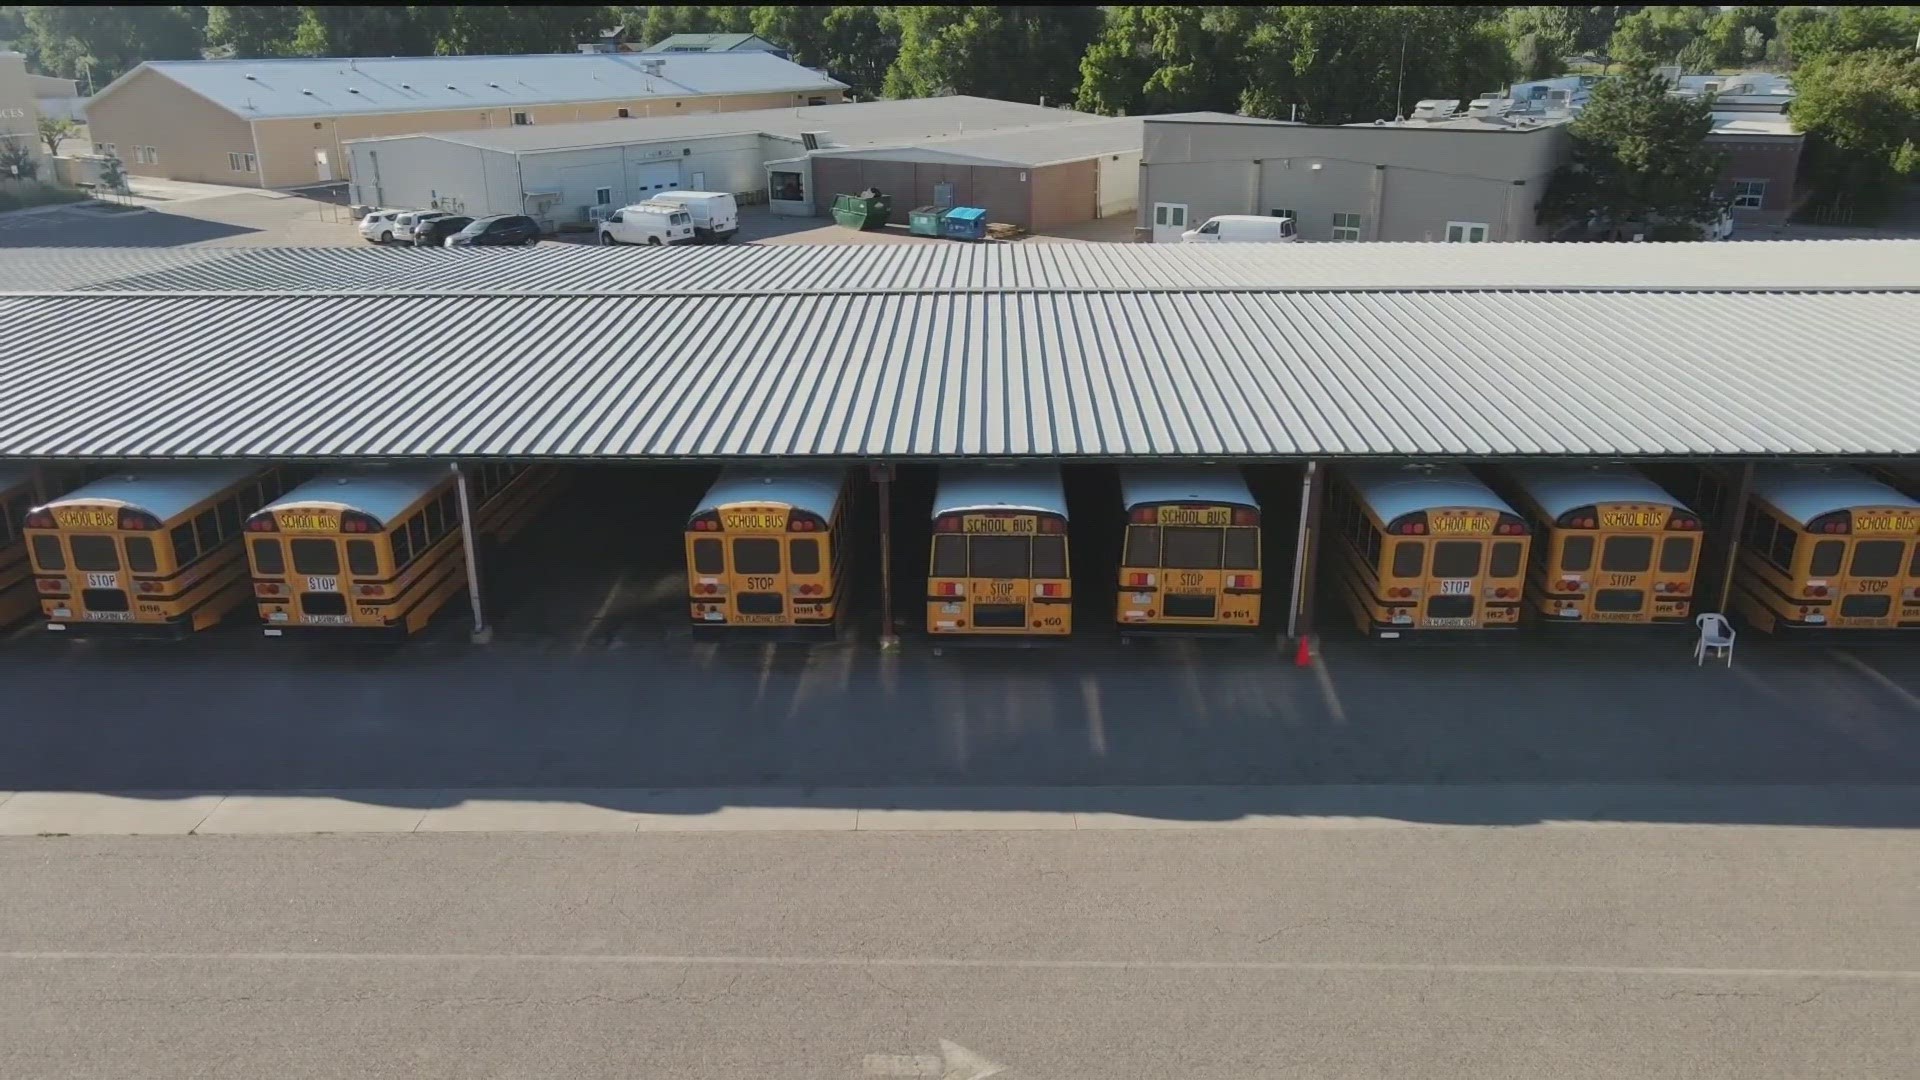 The district implemented new training for bus drivers and instructed them to call families of students who have special needs before the first day of school.